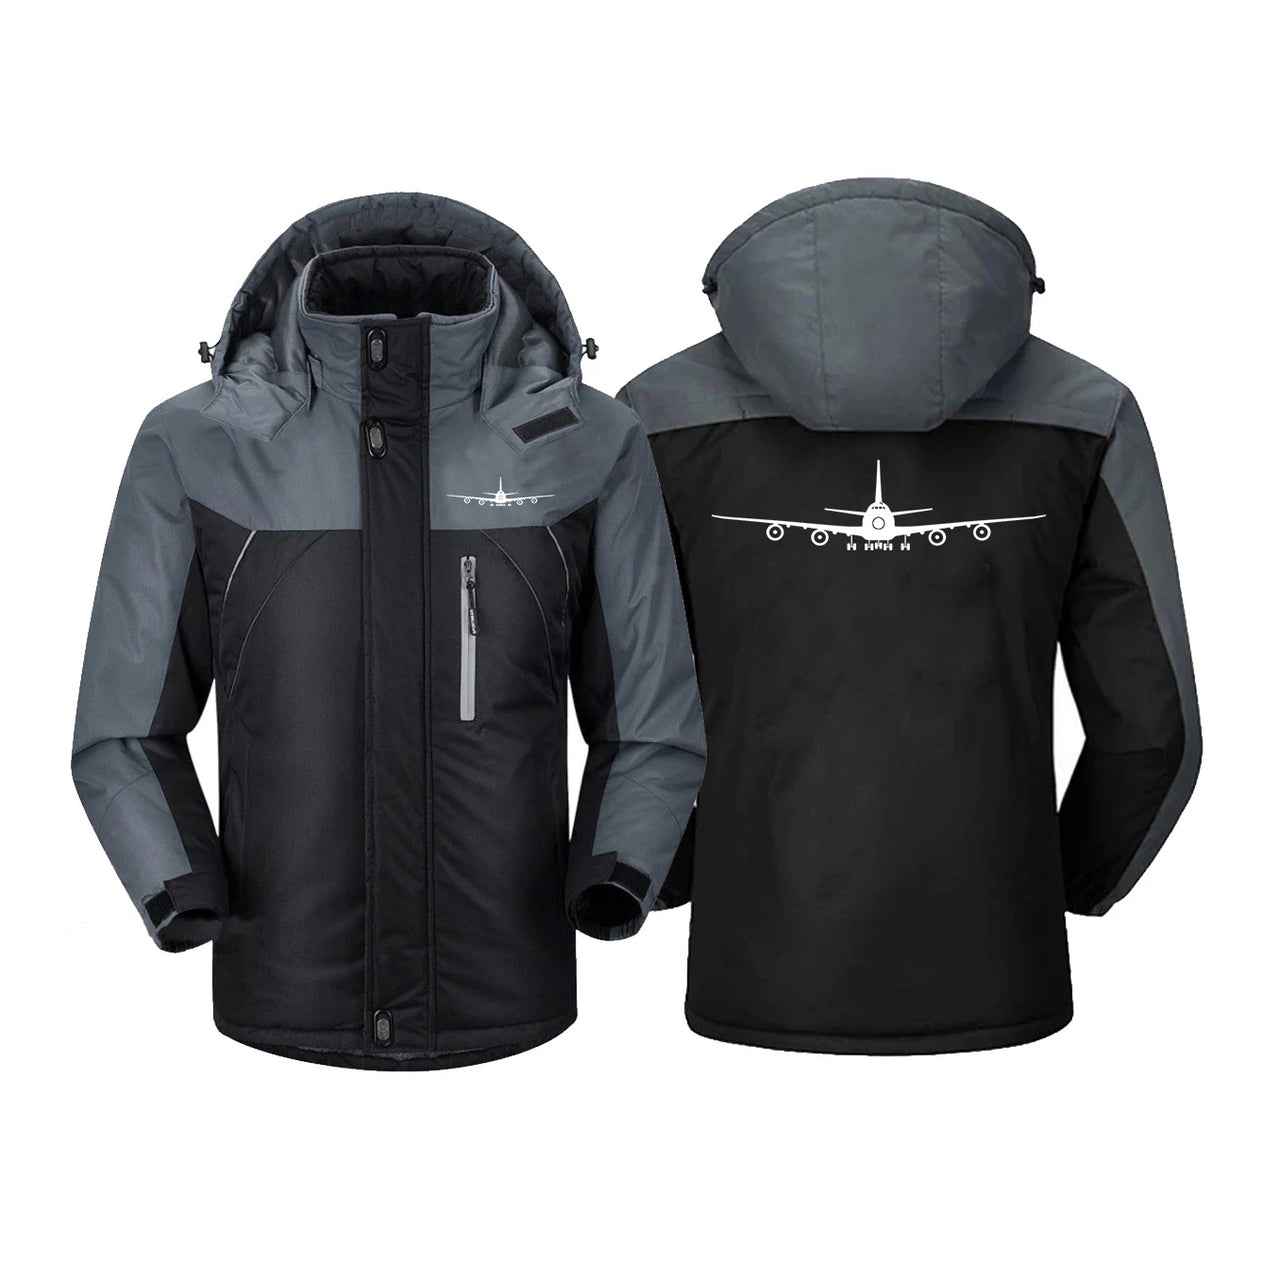 Boeing 747 Silhouette Designed Thick Winter Jackets